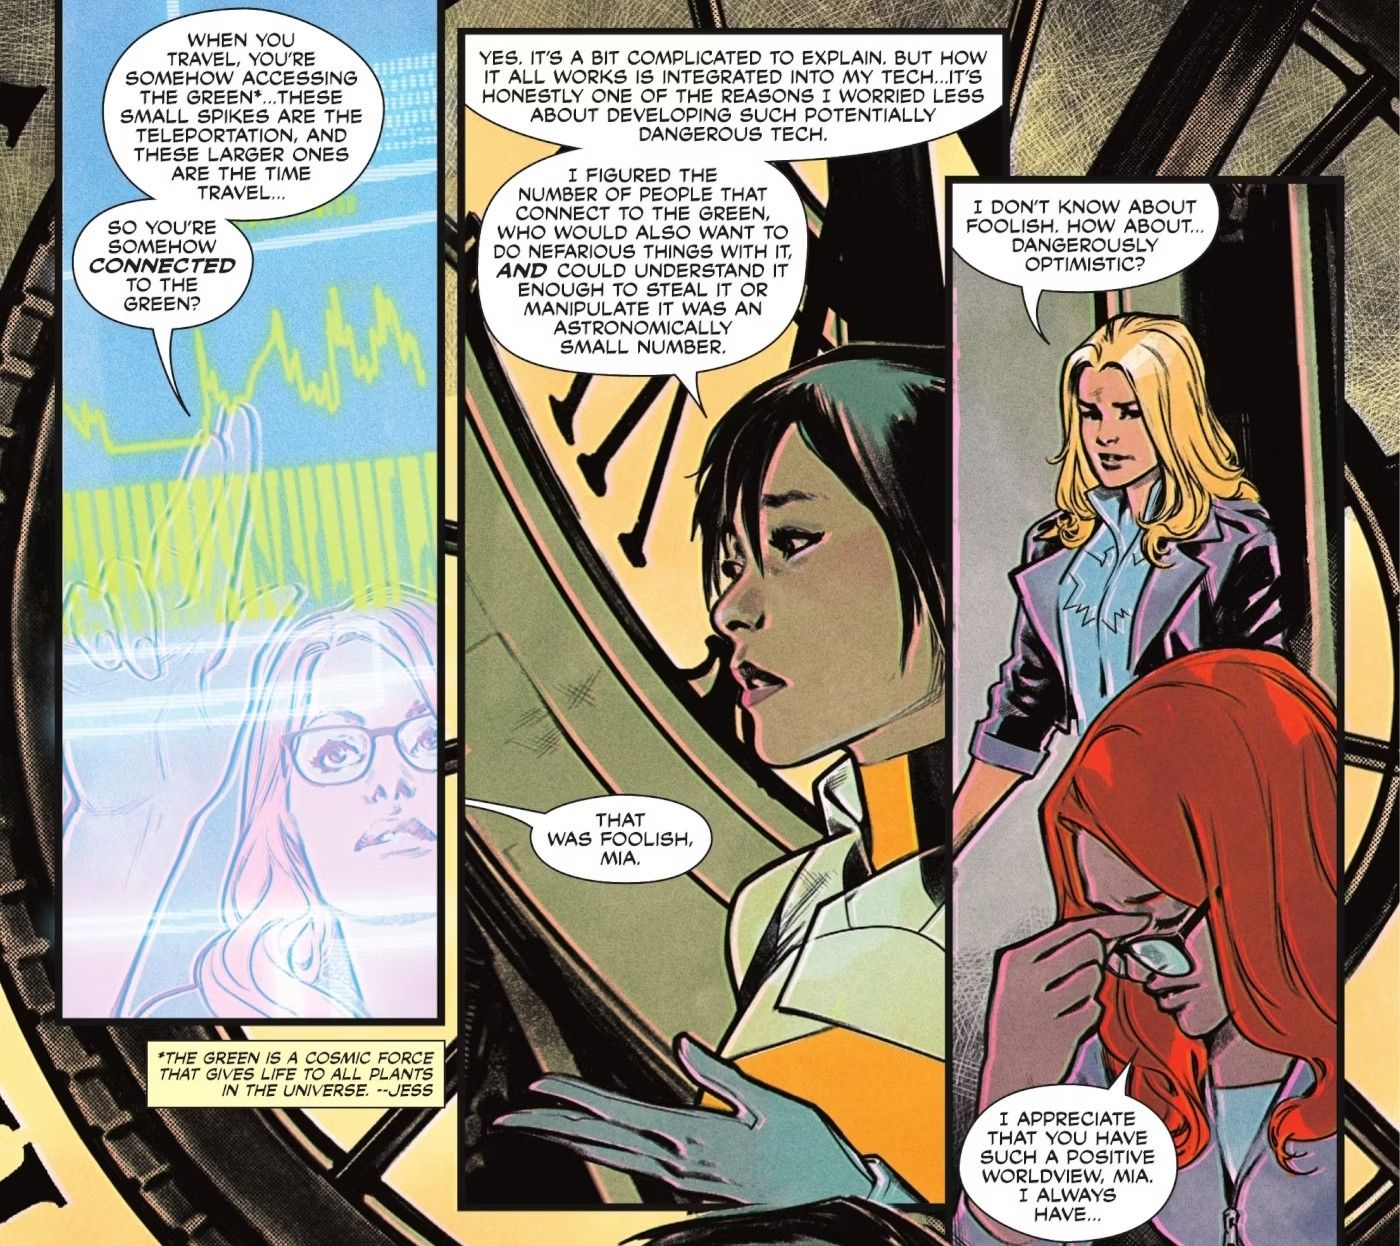 Comic book panels: Barbara Gordon discusses the Green with Meridian and Black Canary from behind a computer screen.